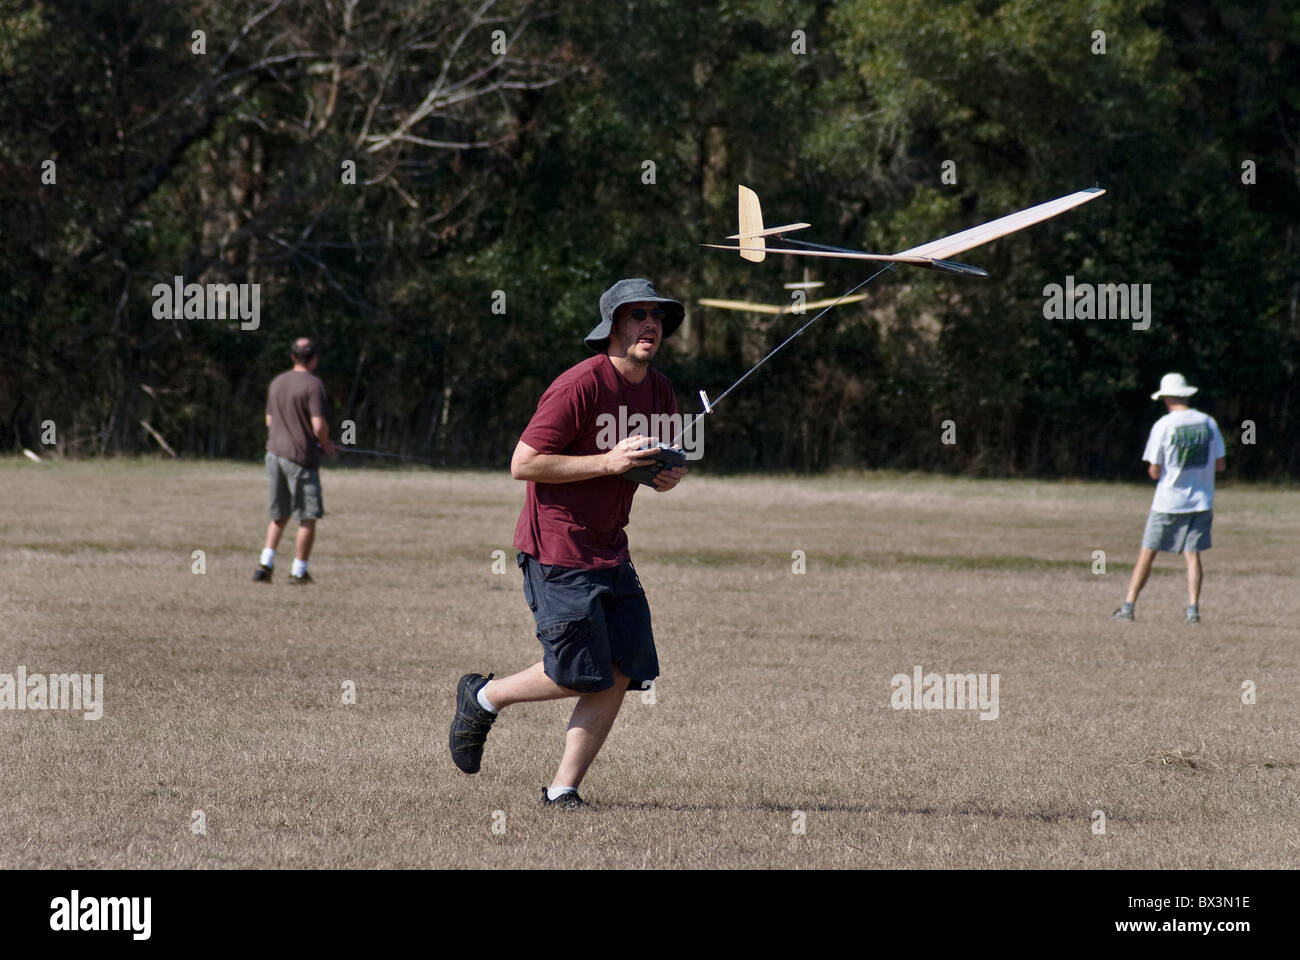 man chases his radio controlled hand launch glider during competition, Alachua, Florida. Stock Photo